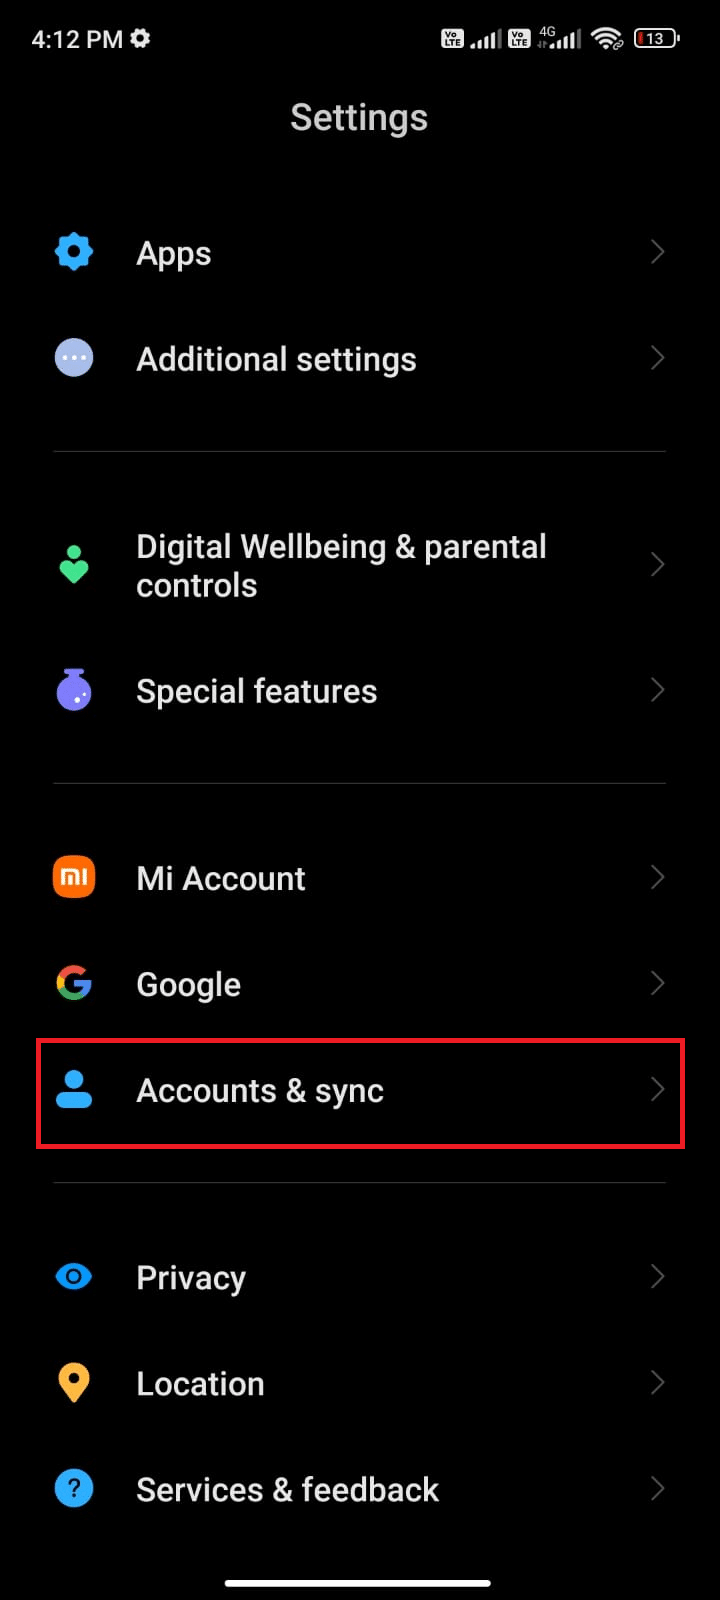 tap the Accounts sync option